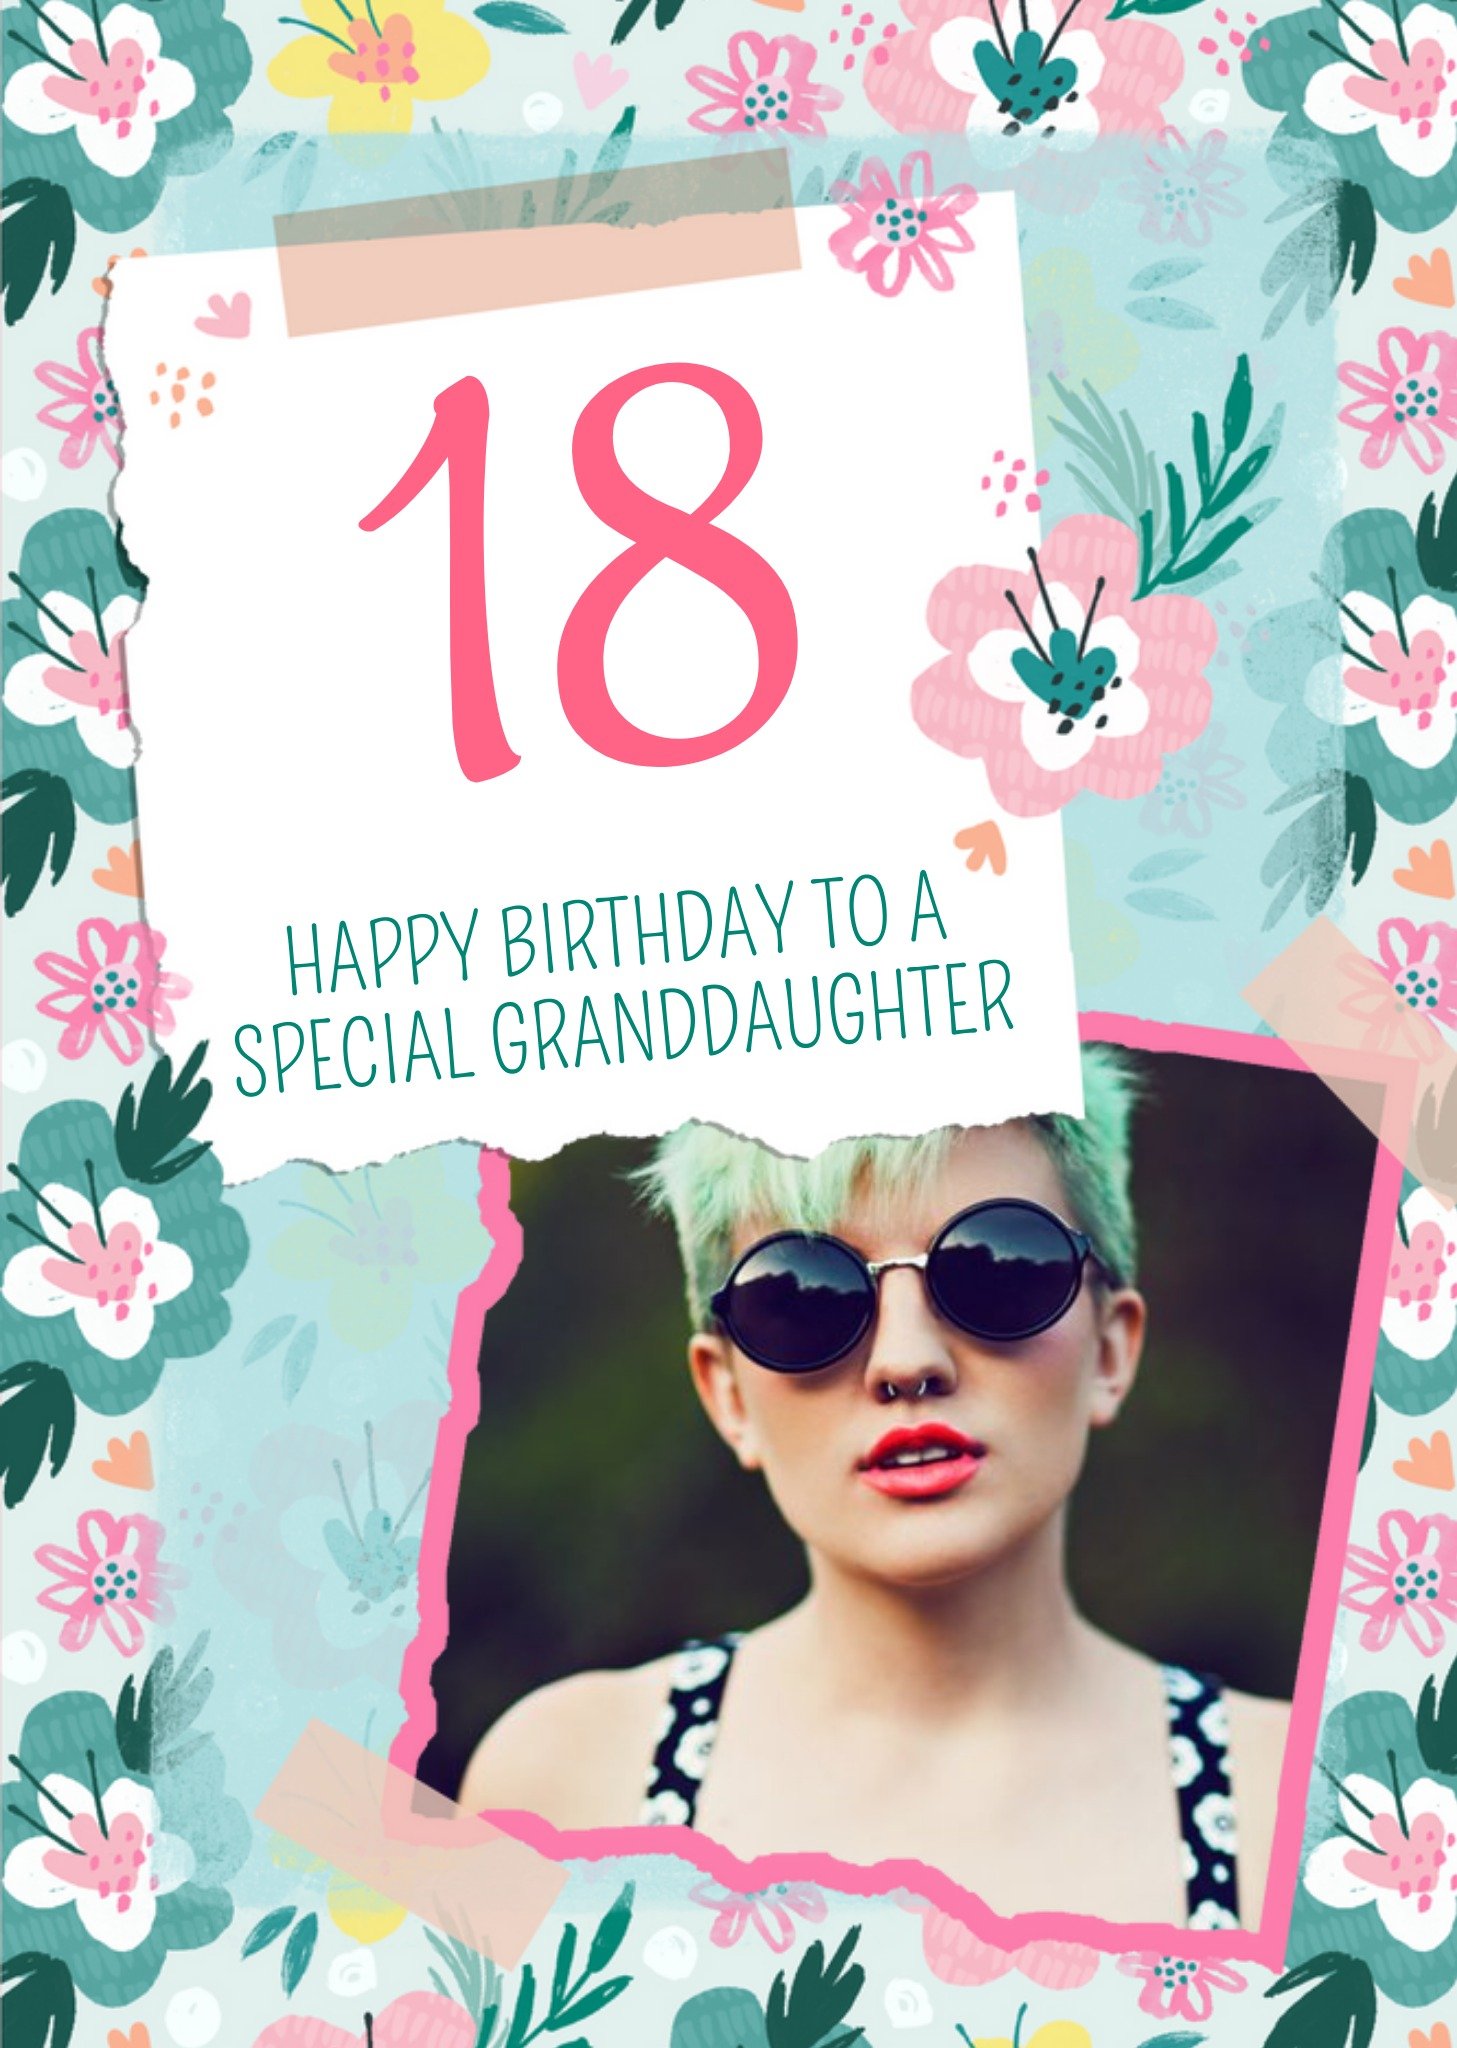 Moonpig Modern Illustrated Photo Upload 18th Birthday Special Granddaughter Card, Large